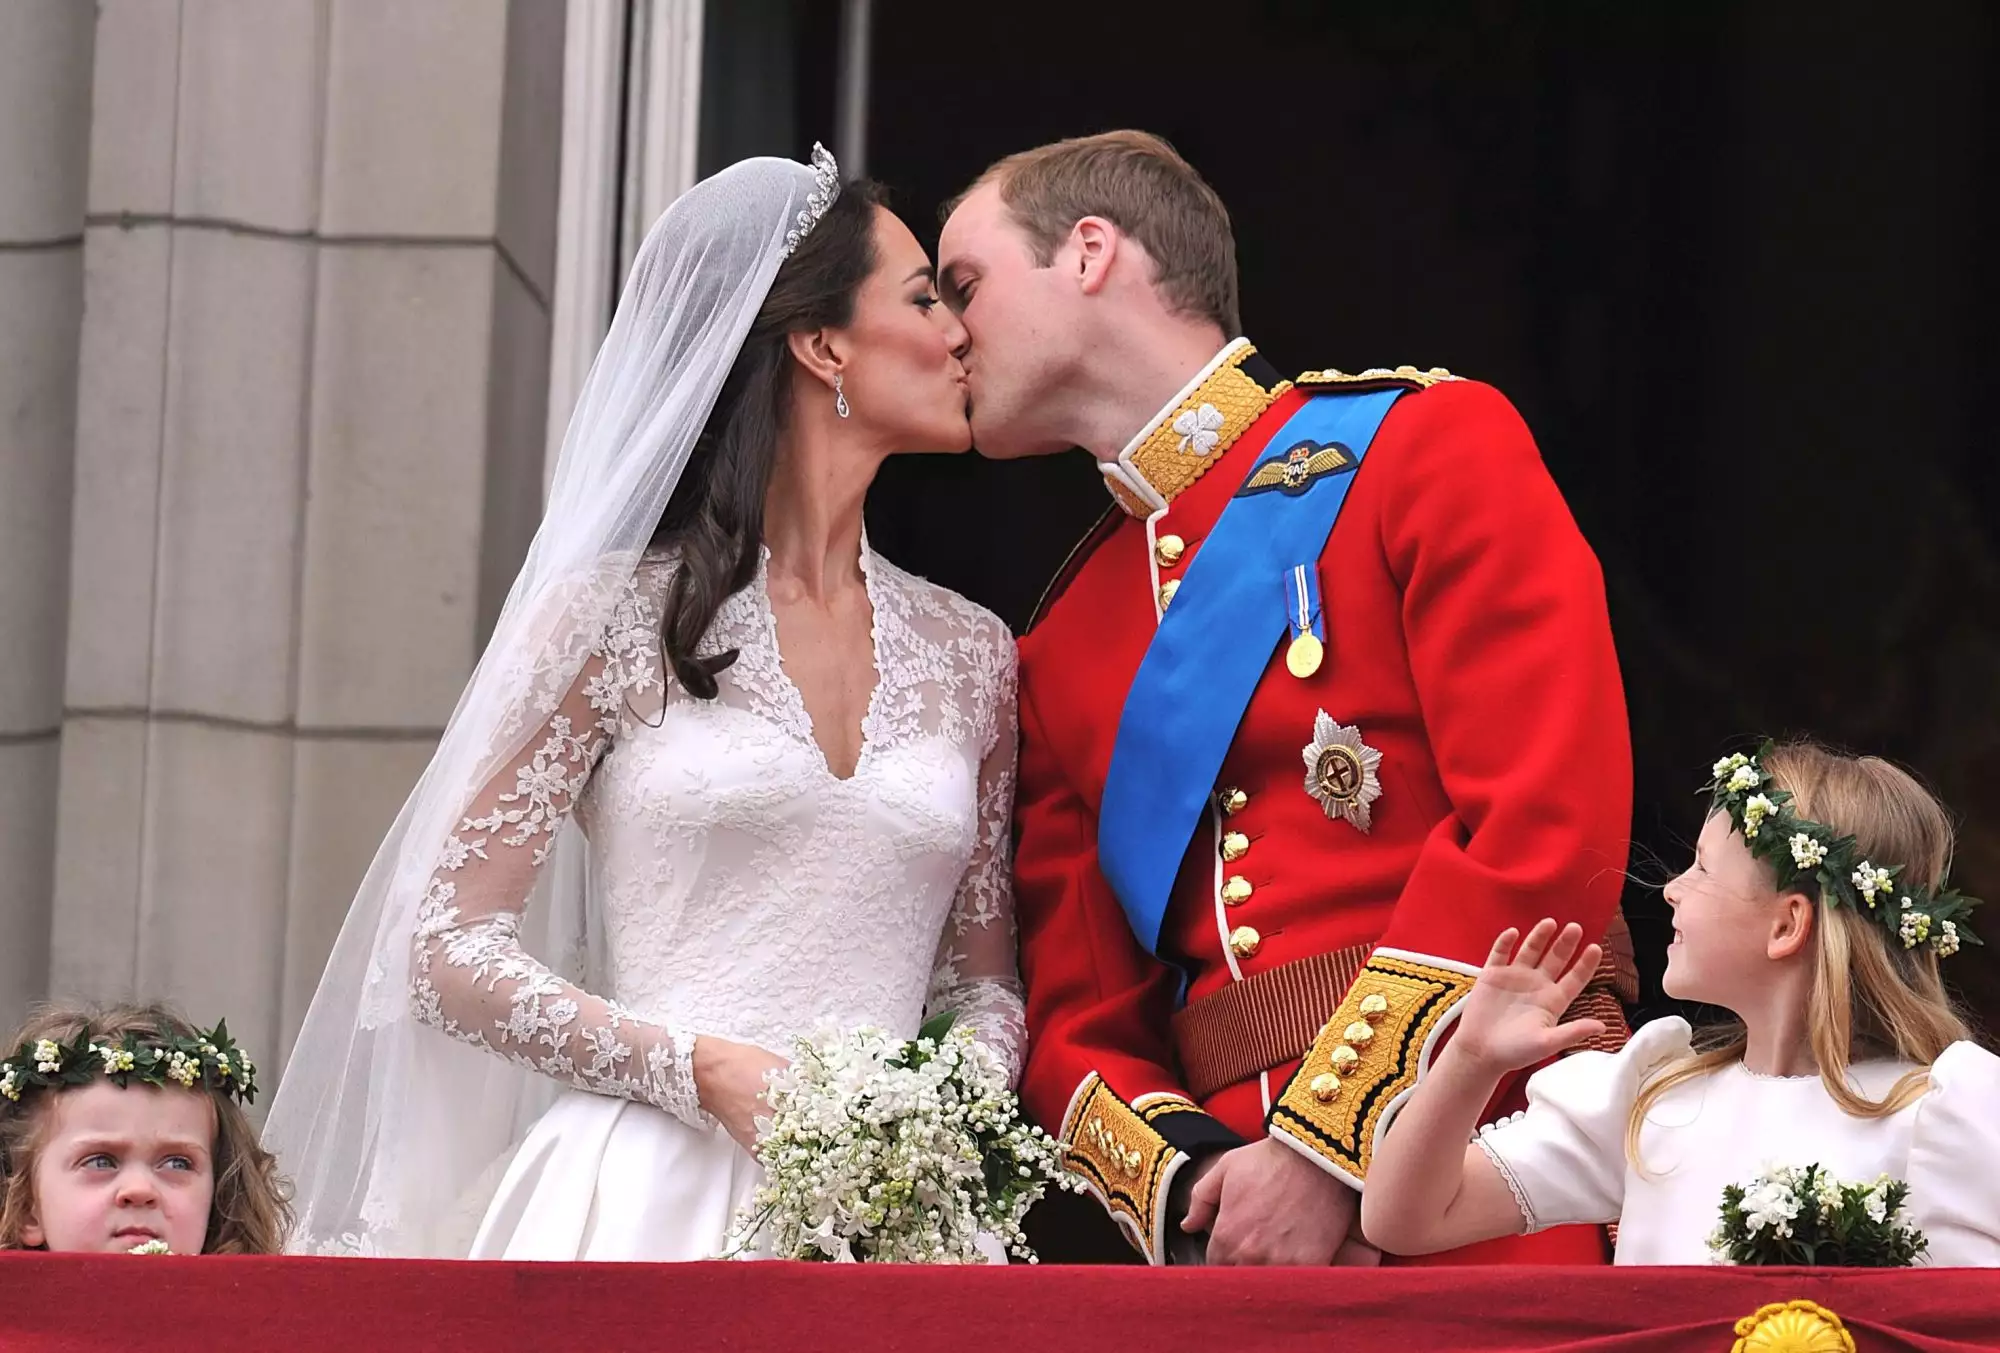 Prince William and Kate Middleton on their wedding day.